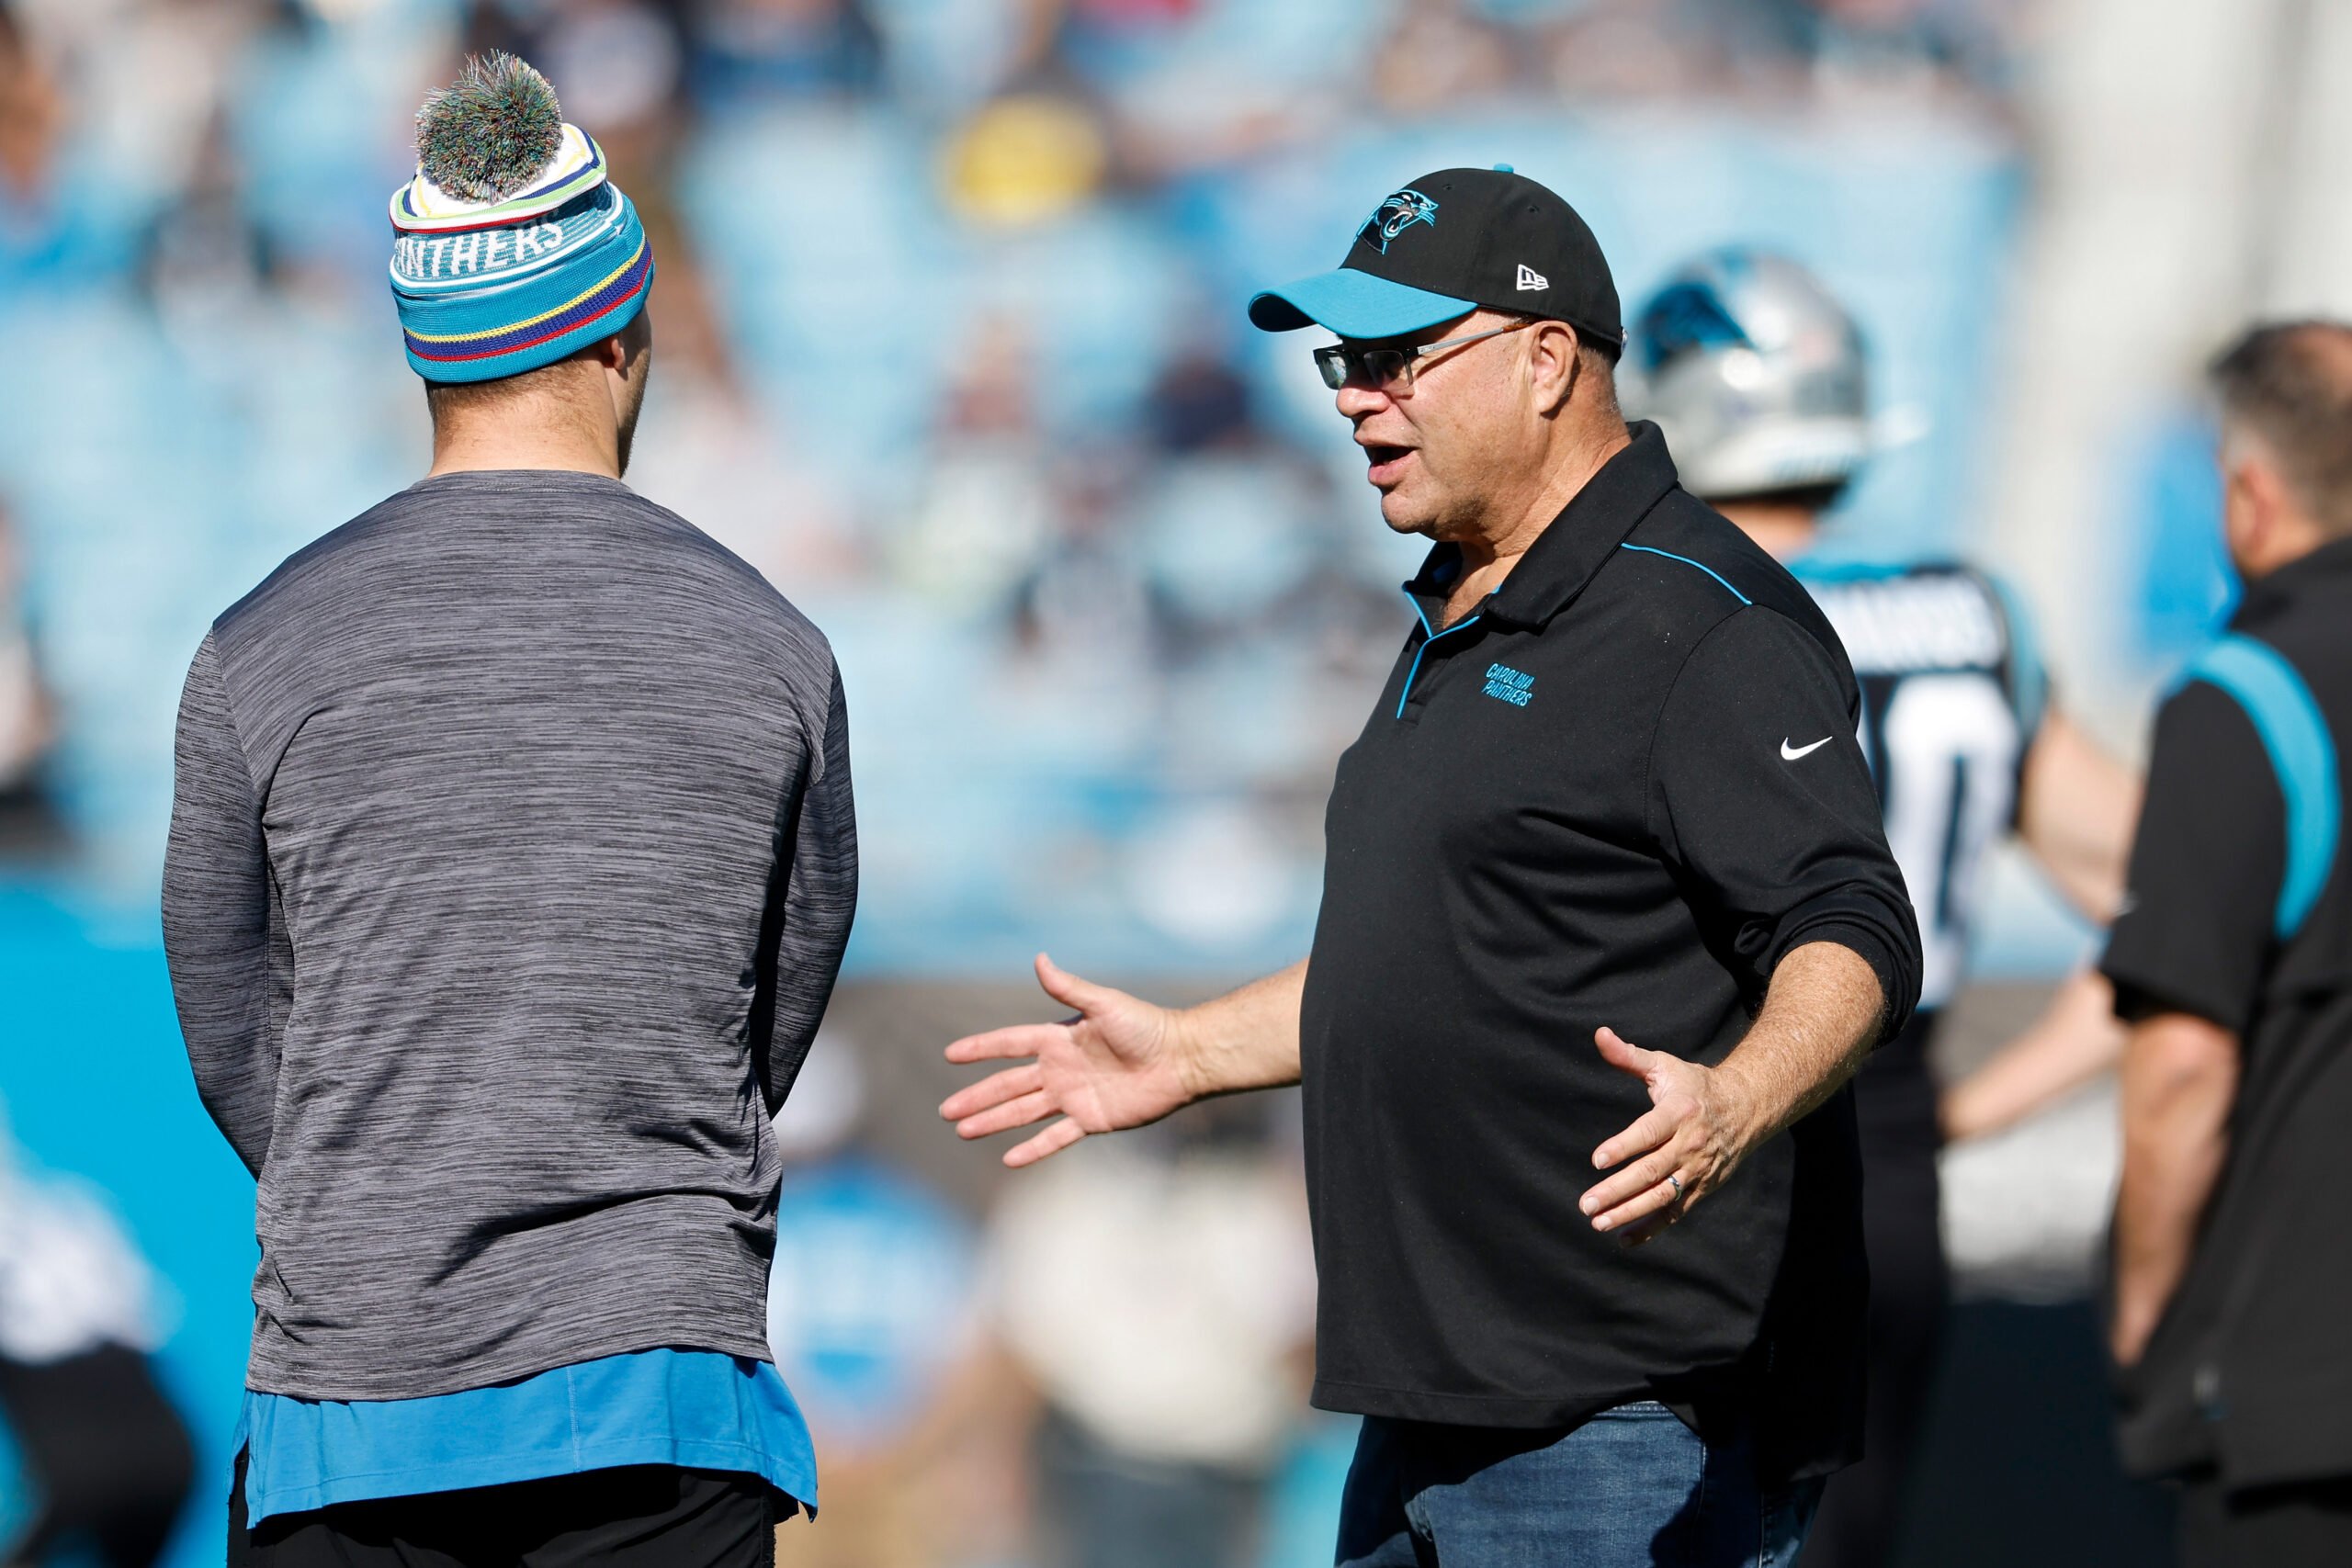 Carolina Panthers owner David Tepper, out on the field with member of his football team